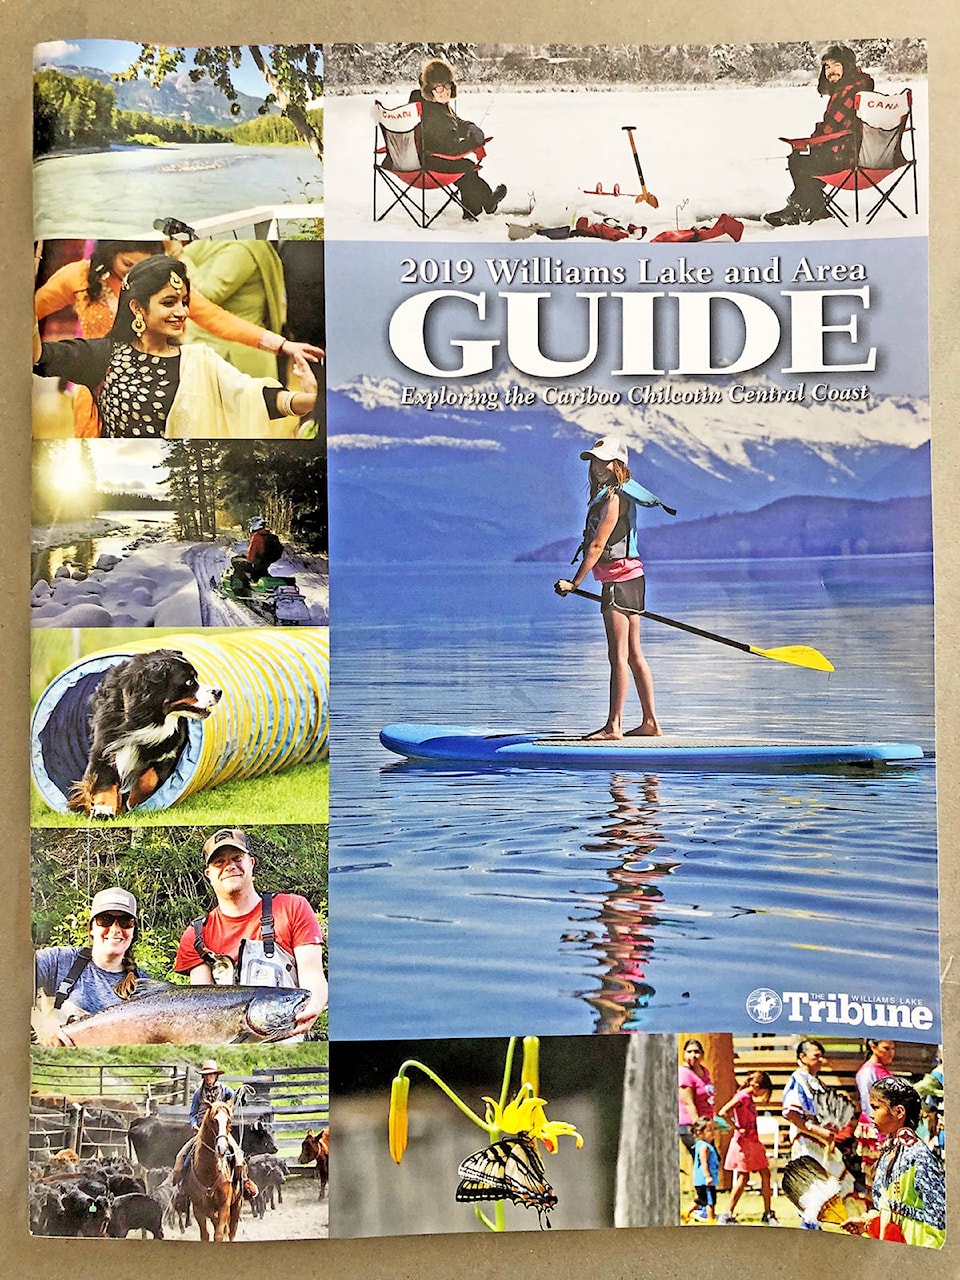 15965803_web1_190314-WLT-GuideCOver1